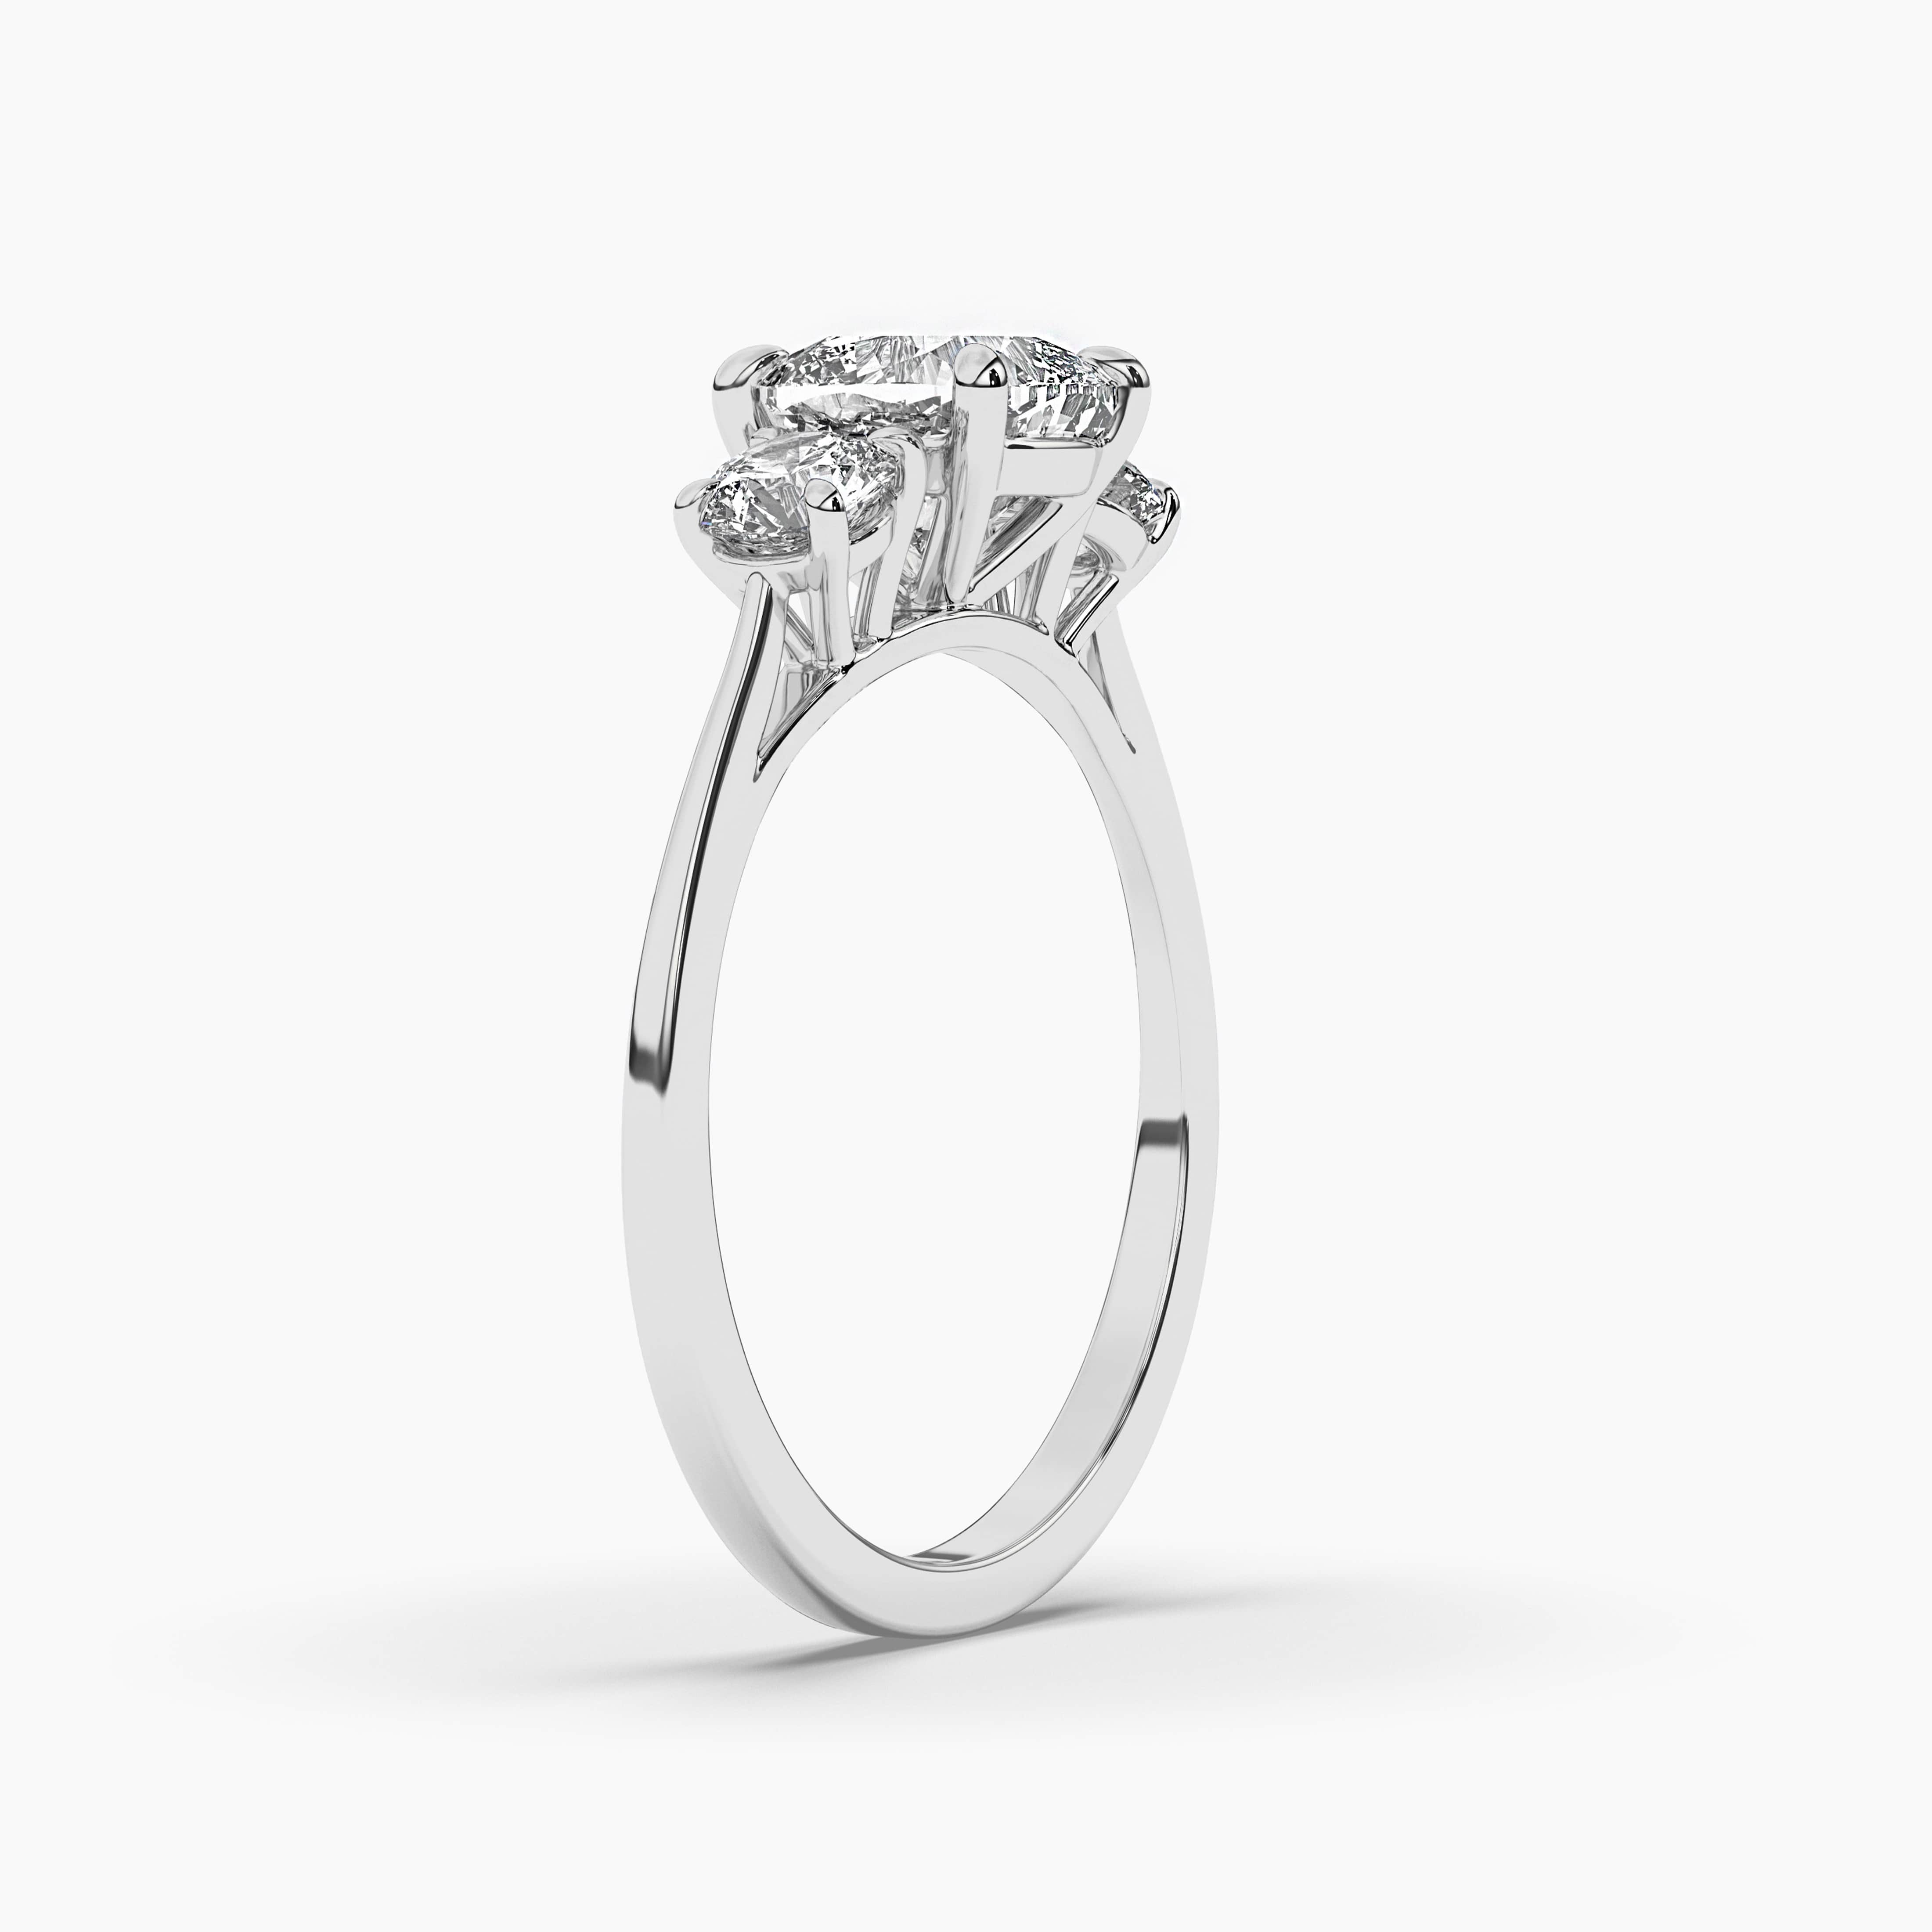 WHITE GOLD DIAMOND ENGAGEMENT RING FOR WOMAN